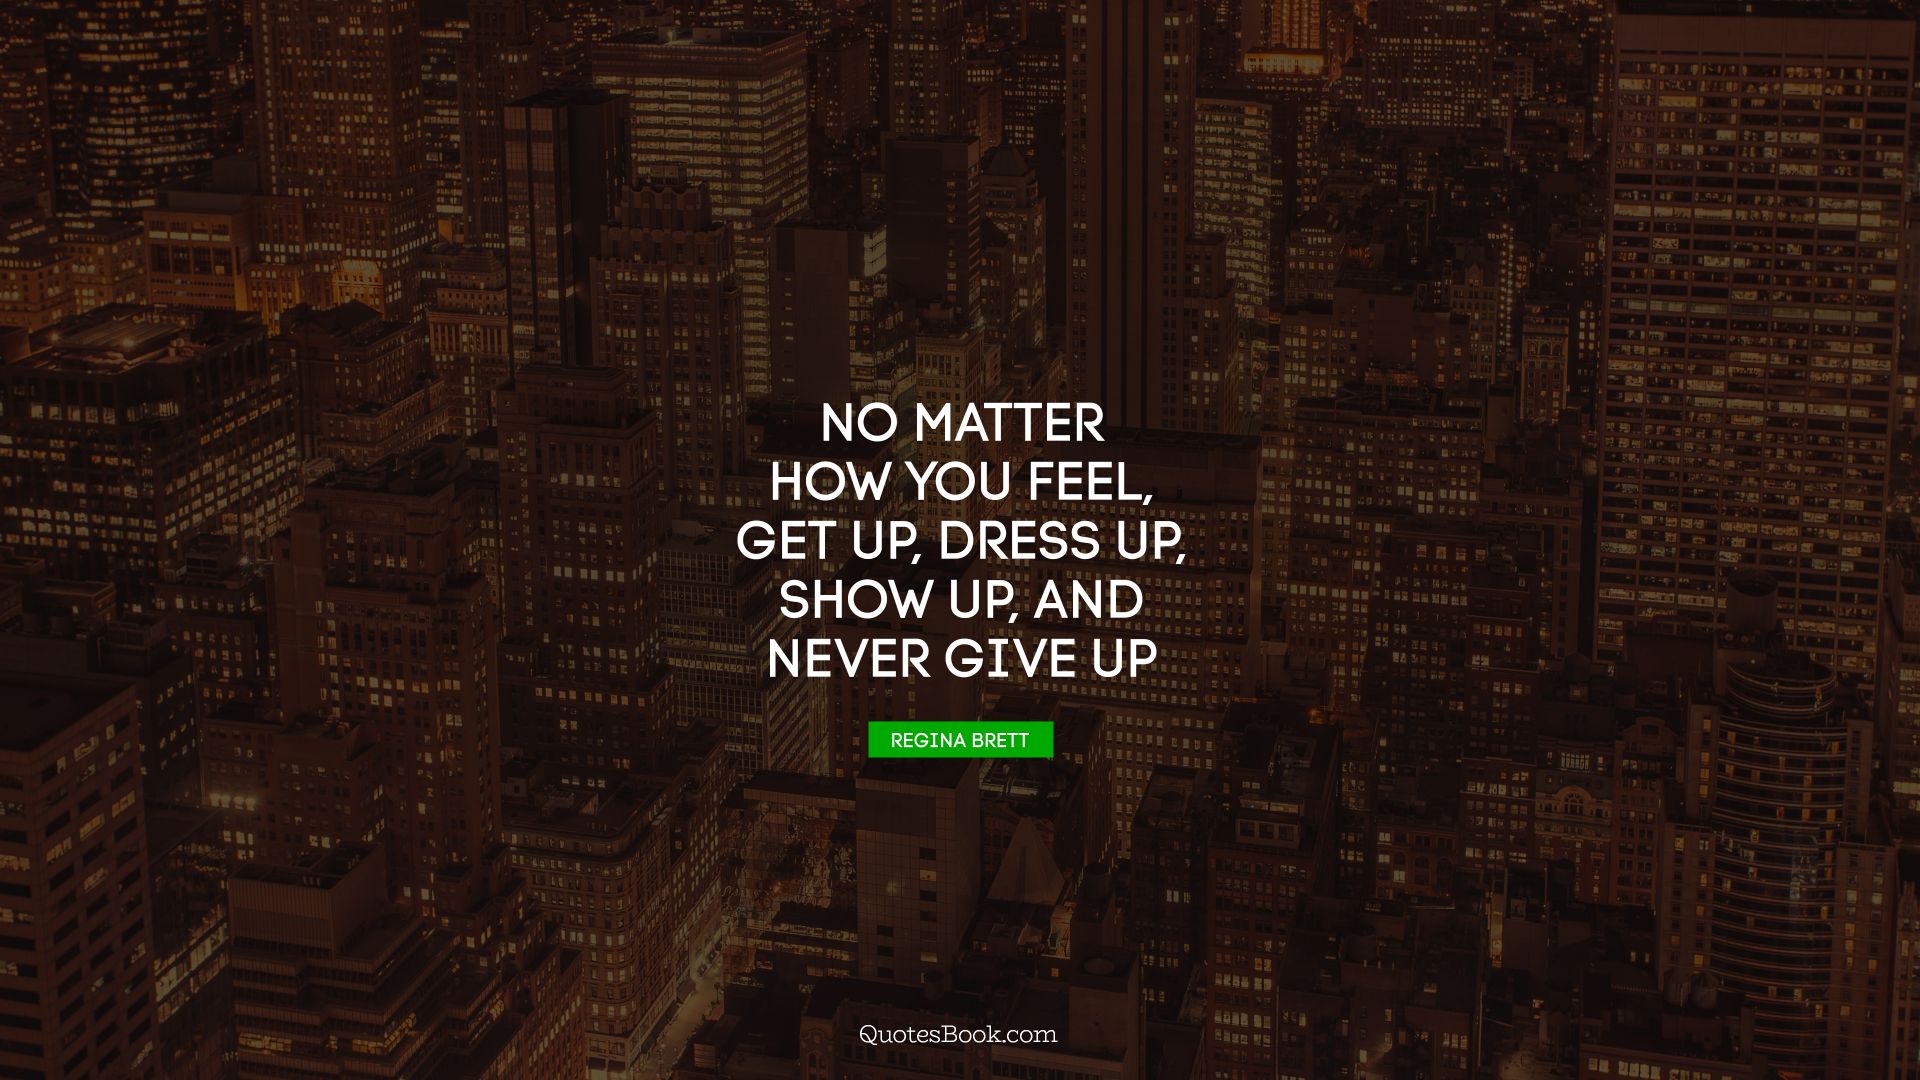 No Matter How You Feel, Get Up, Dress Up, Show Up, - Wake Up Make Up And Never Give Up - HD Wallpaper 